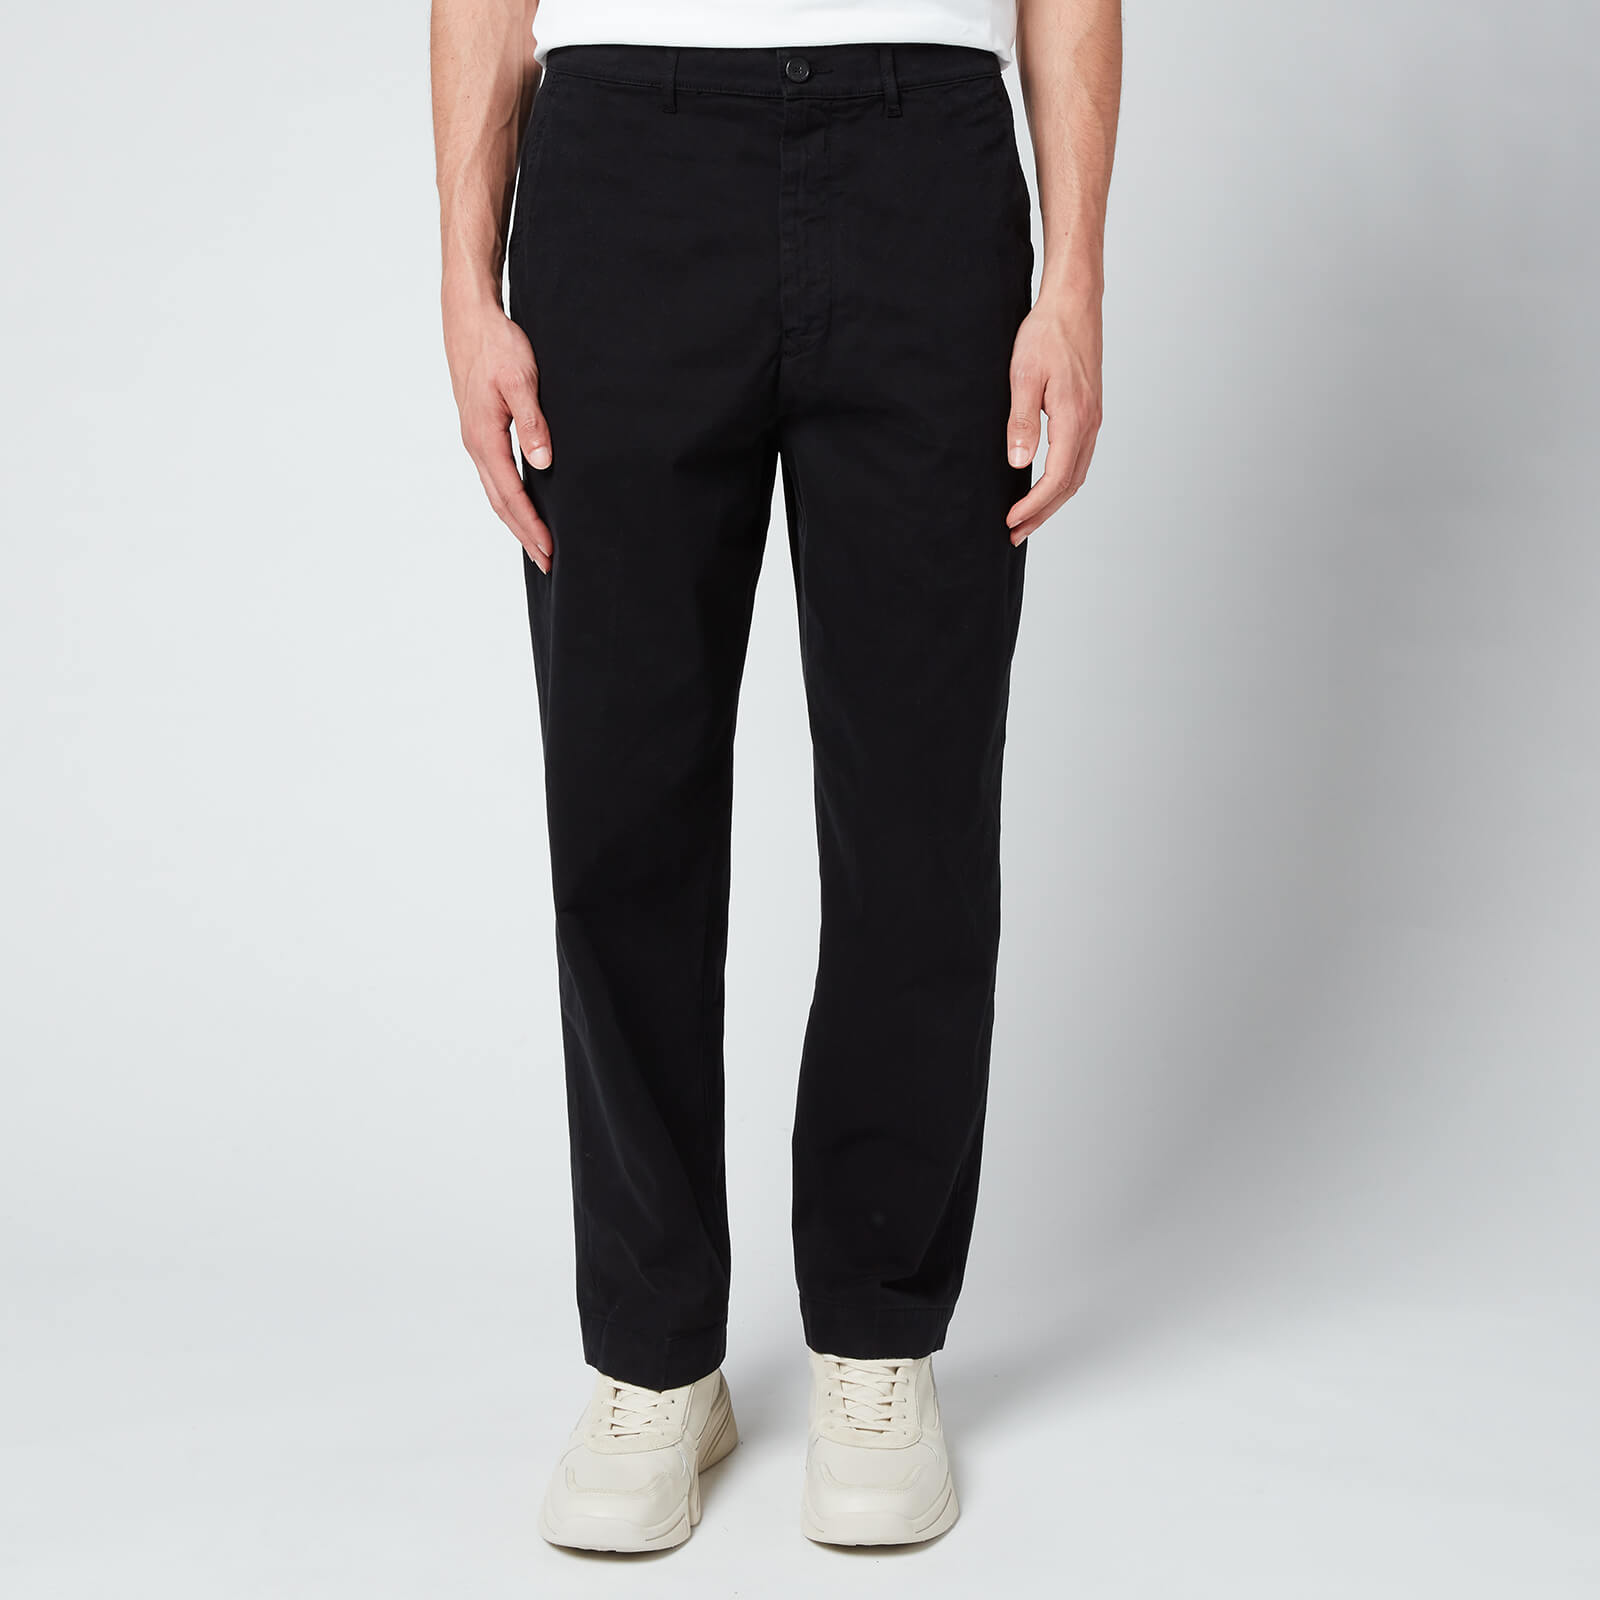 KENZO Men's Tapered Cropped Trousers - Black - 38/S